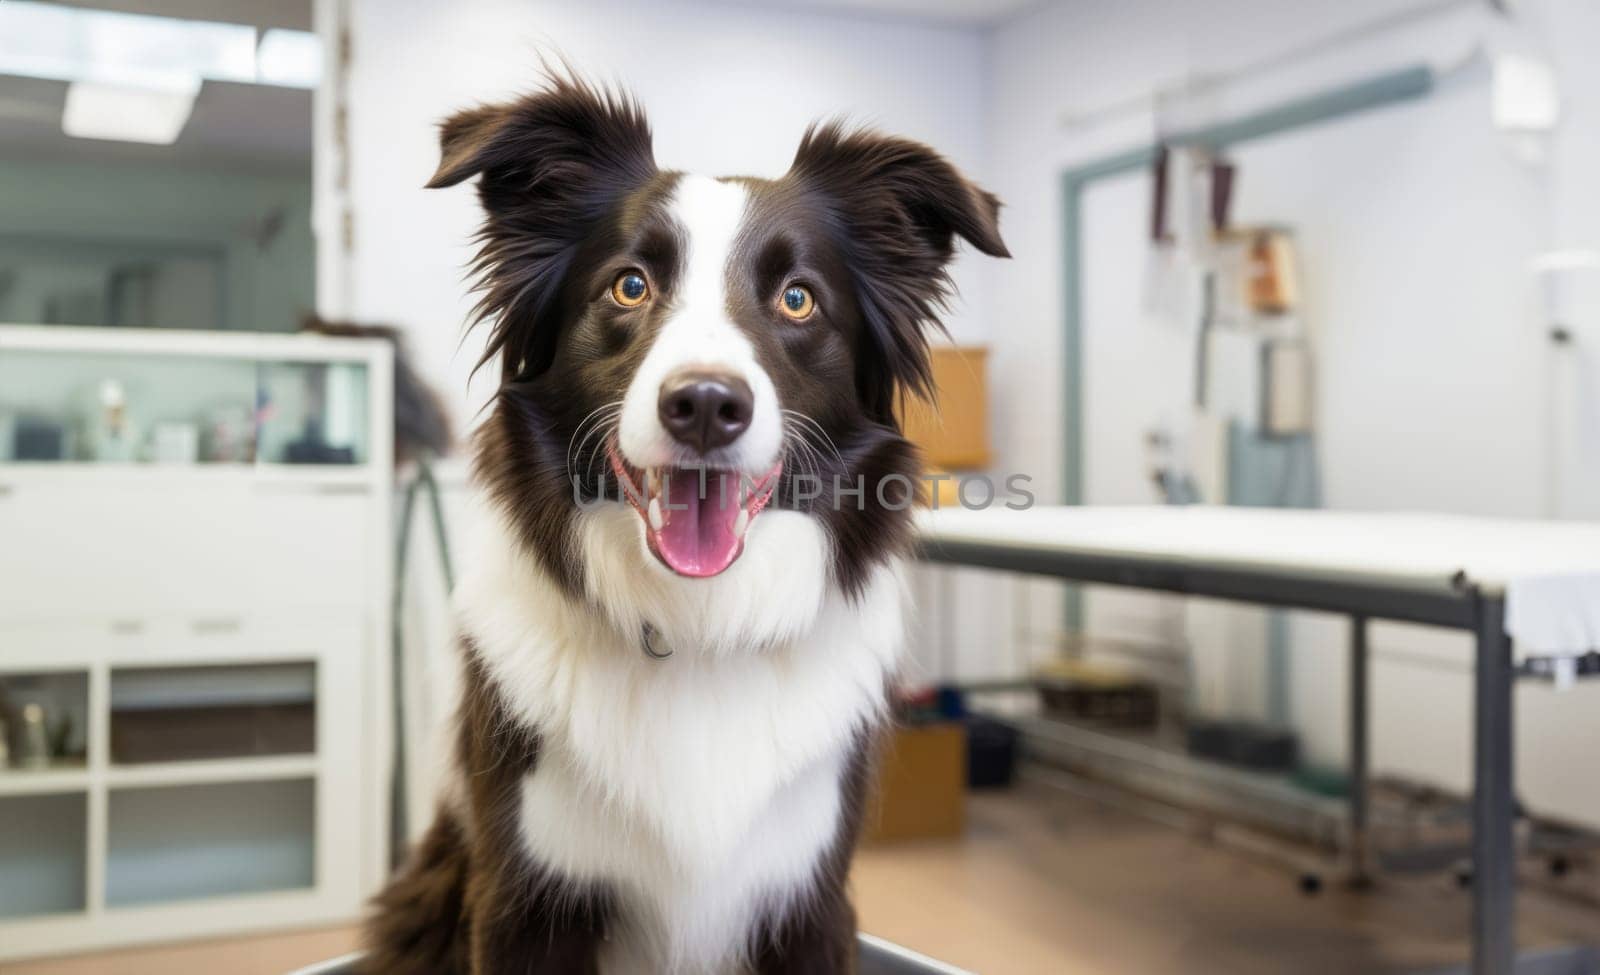 A black-and-white dog patiently awaits its veterinary examination in the clinic.Generated image.